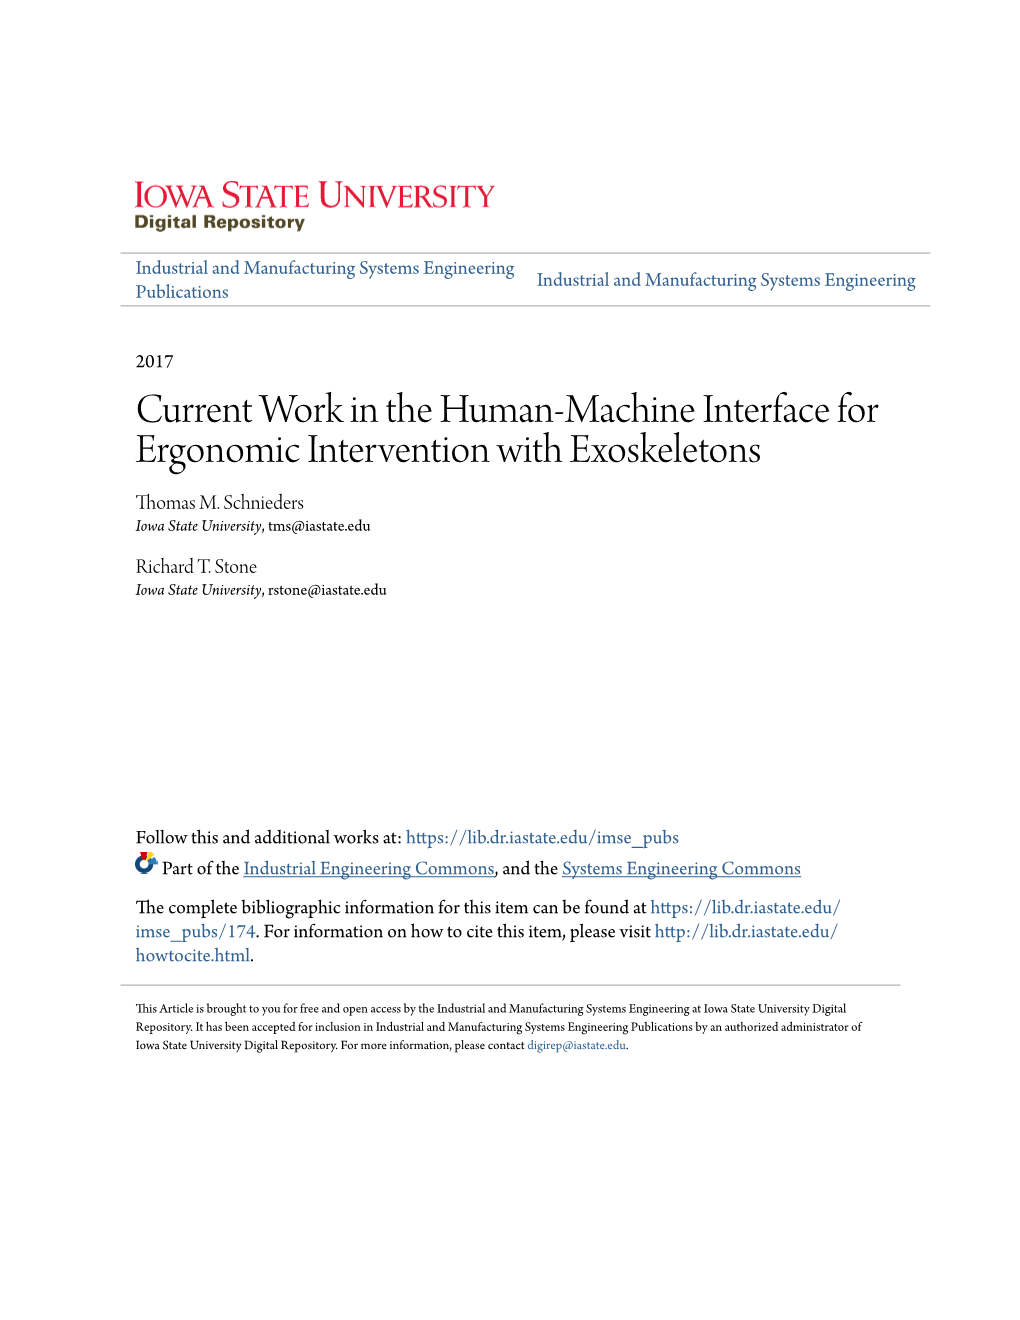 Current Work in the Human-Machine Interface for Ergonomic Intervention with Exoskeletons Thomas M